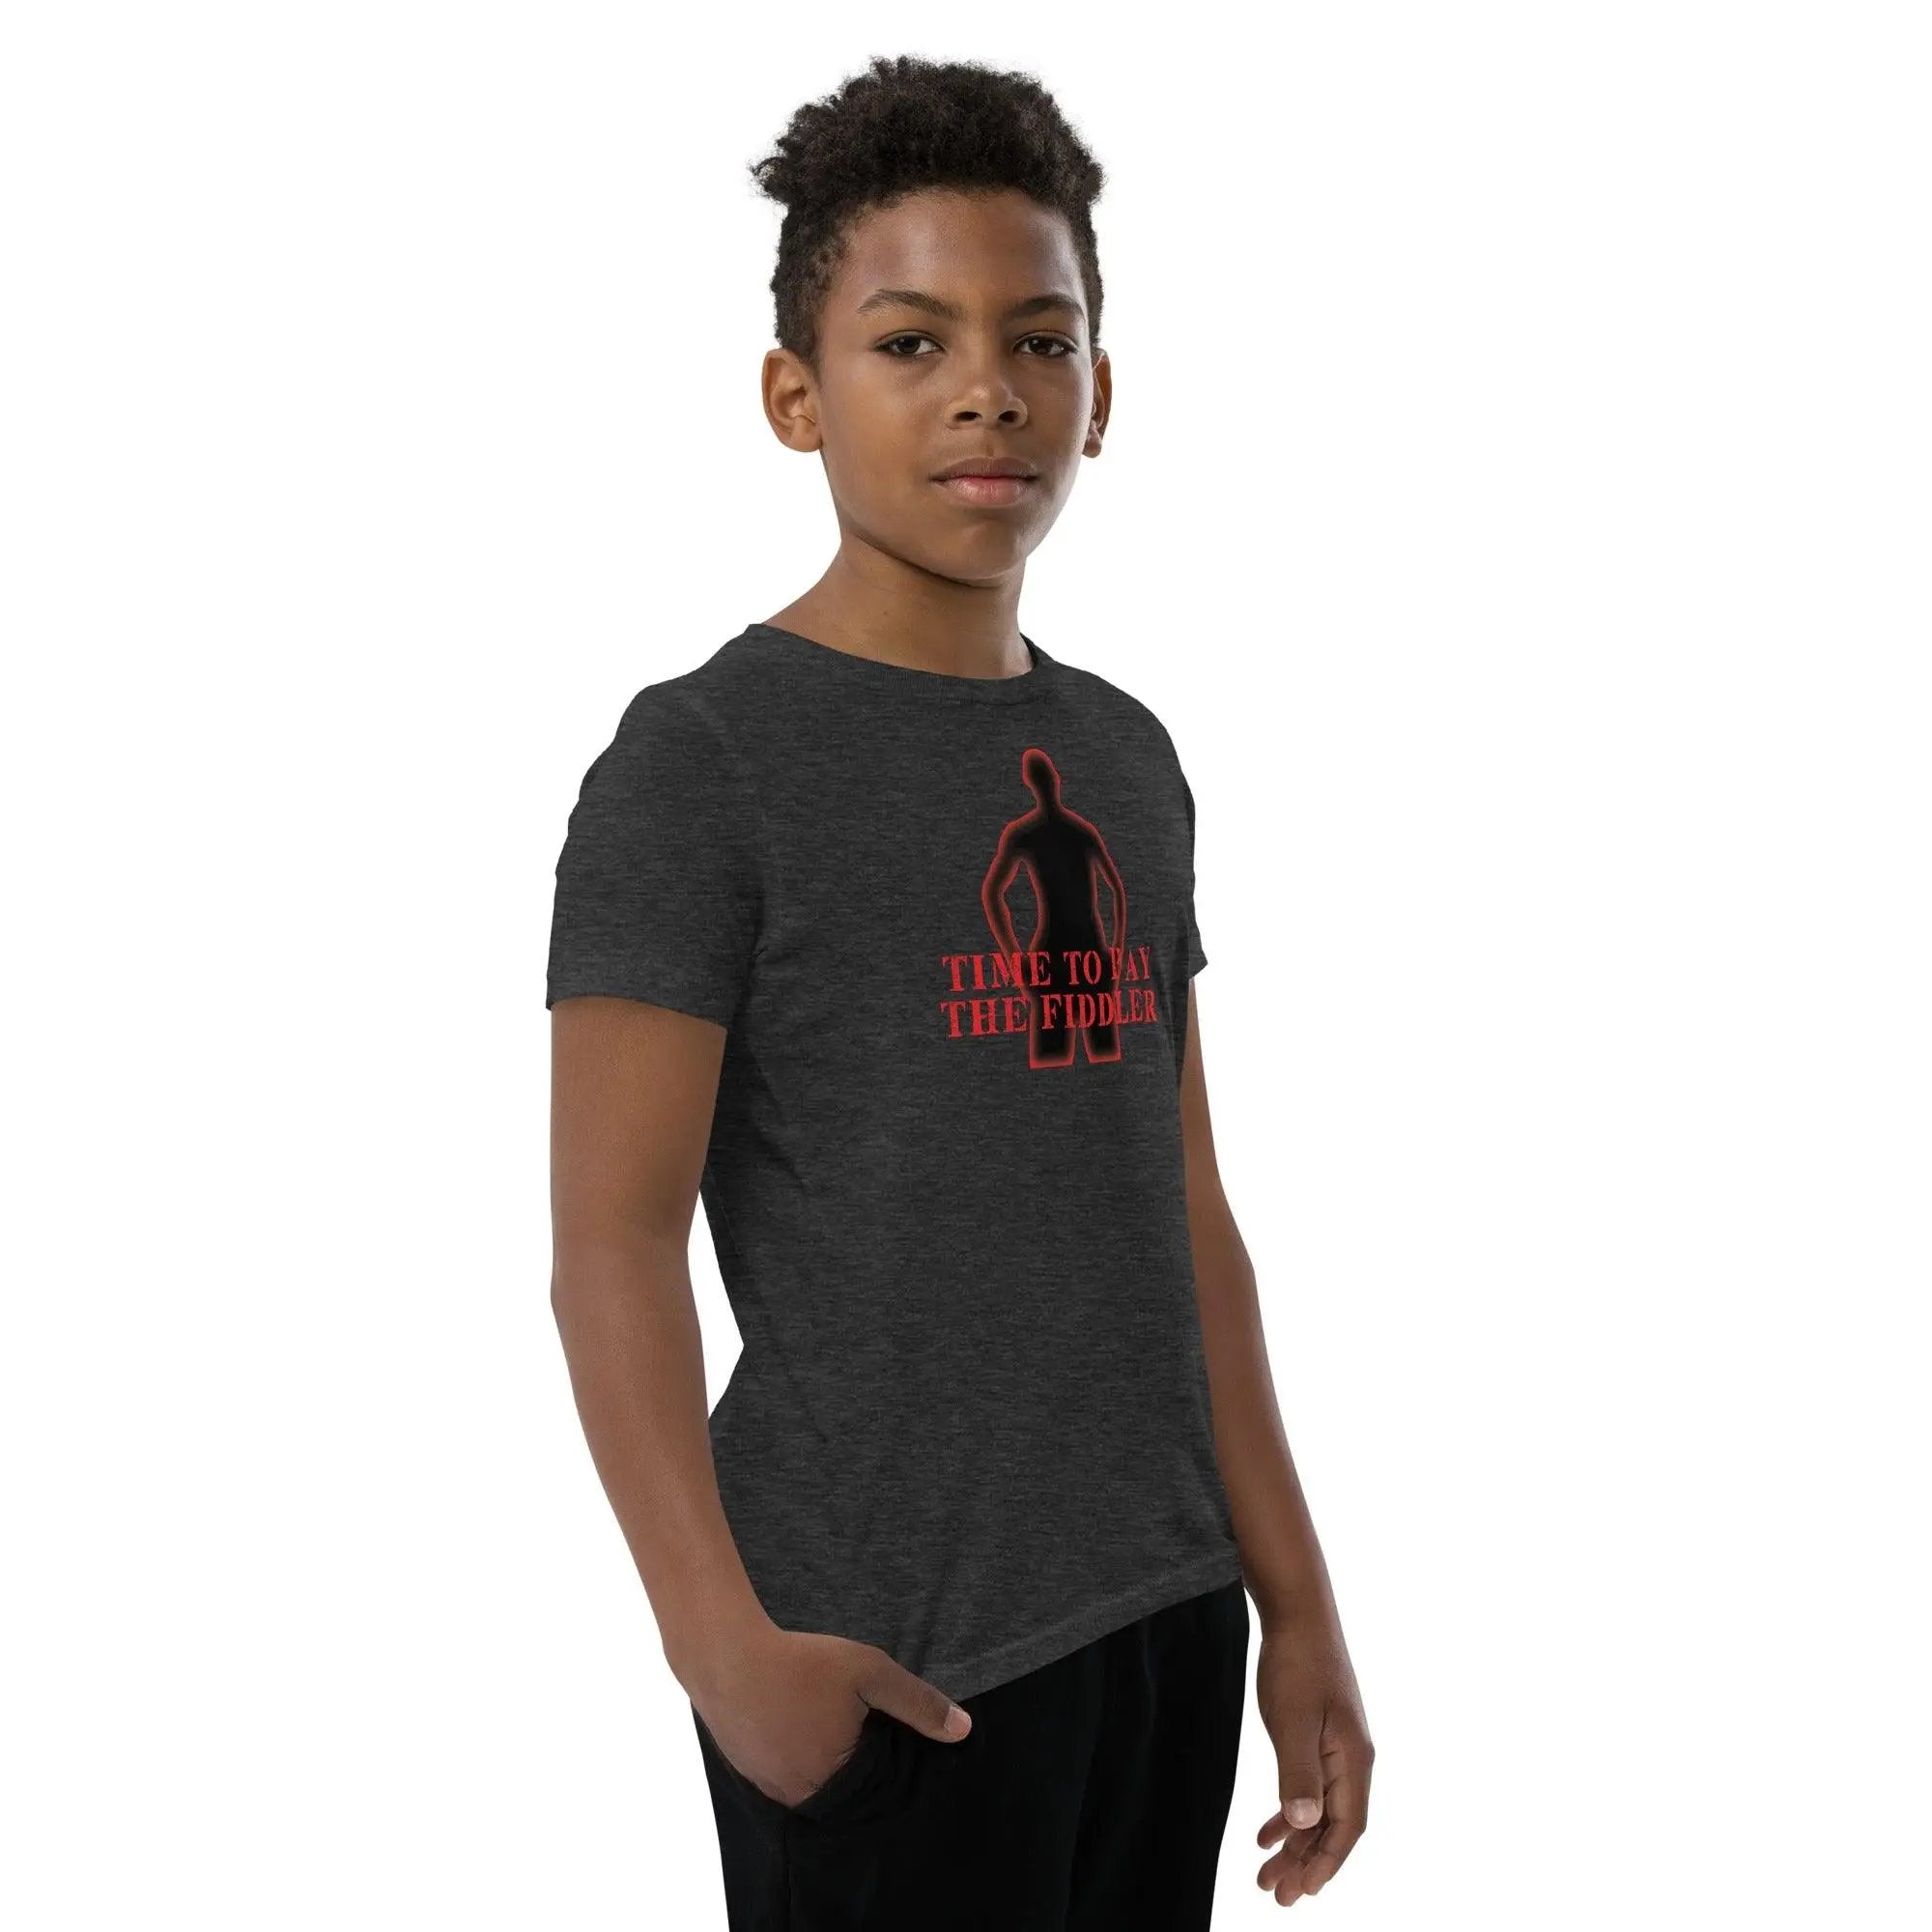 Time To Pay The Fiddler Youth Short Sleeve T-Shirt